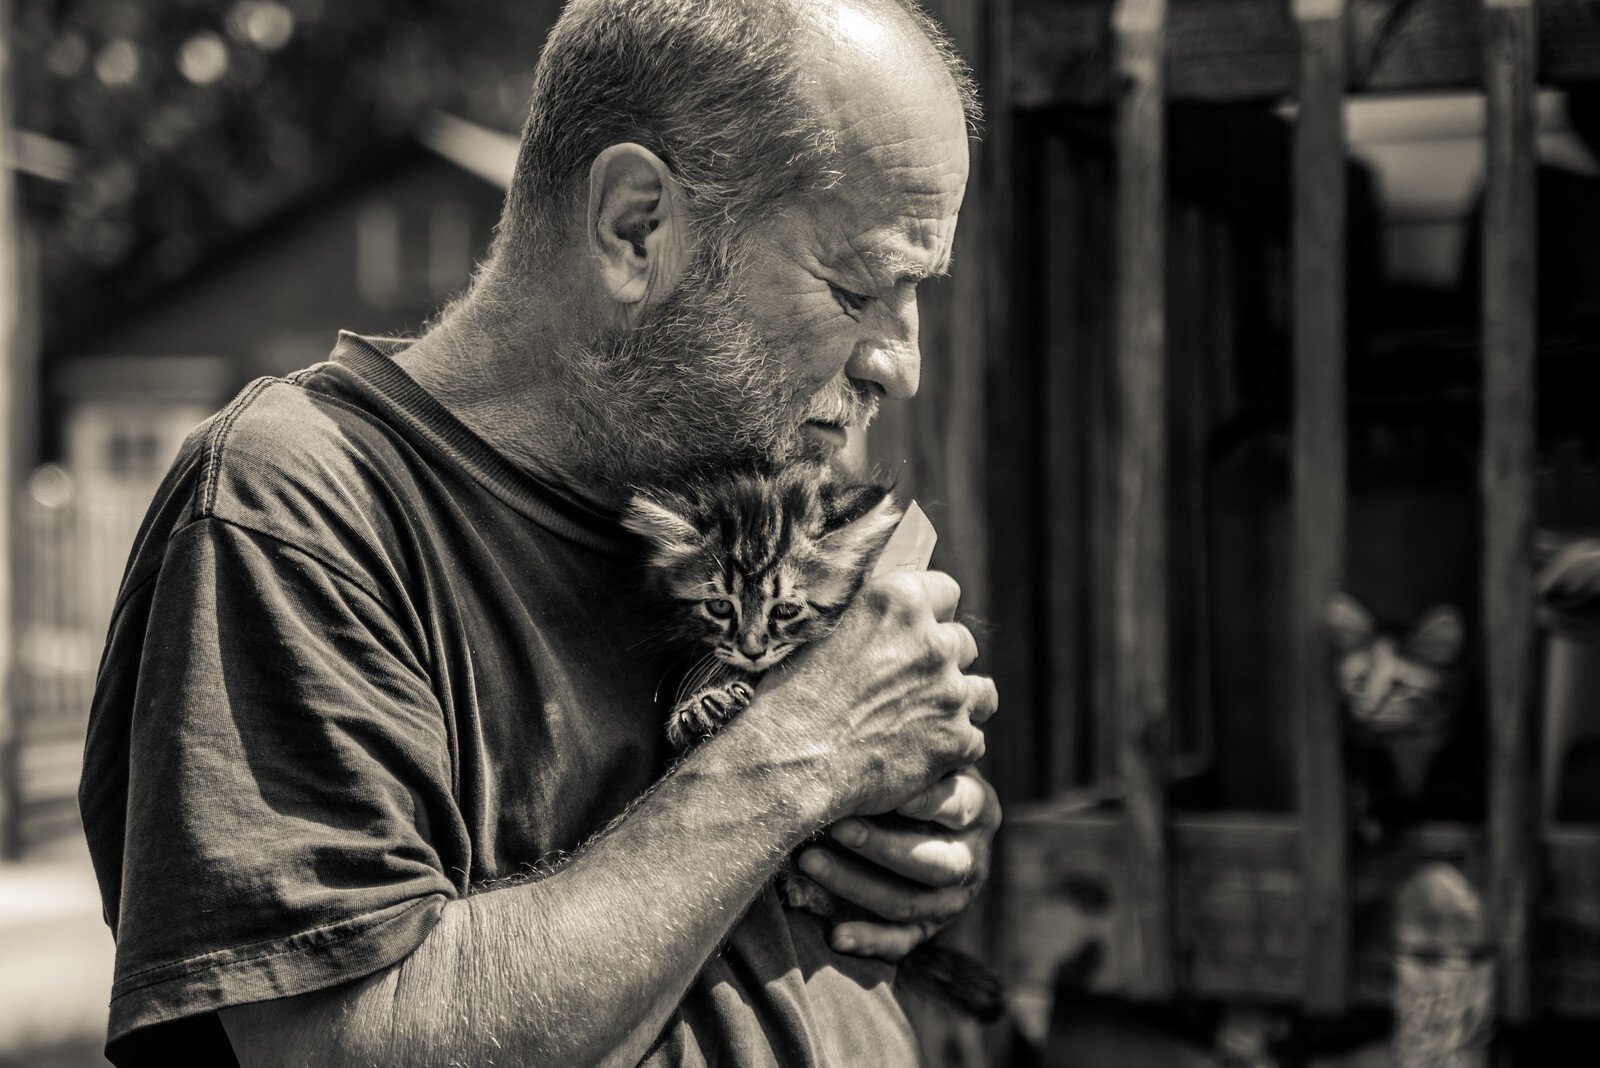 On another photo shoot in her neighborhood, a man came out and asked if she wanted a kitten. This photo drew new owners of several of the litter.